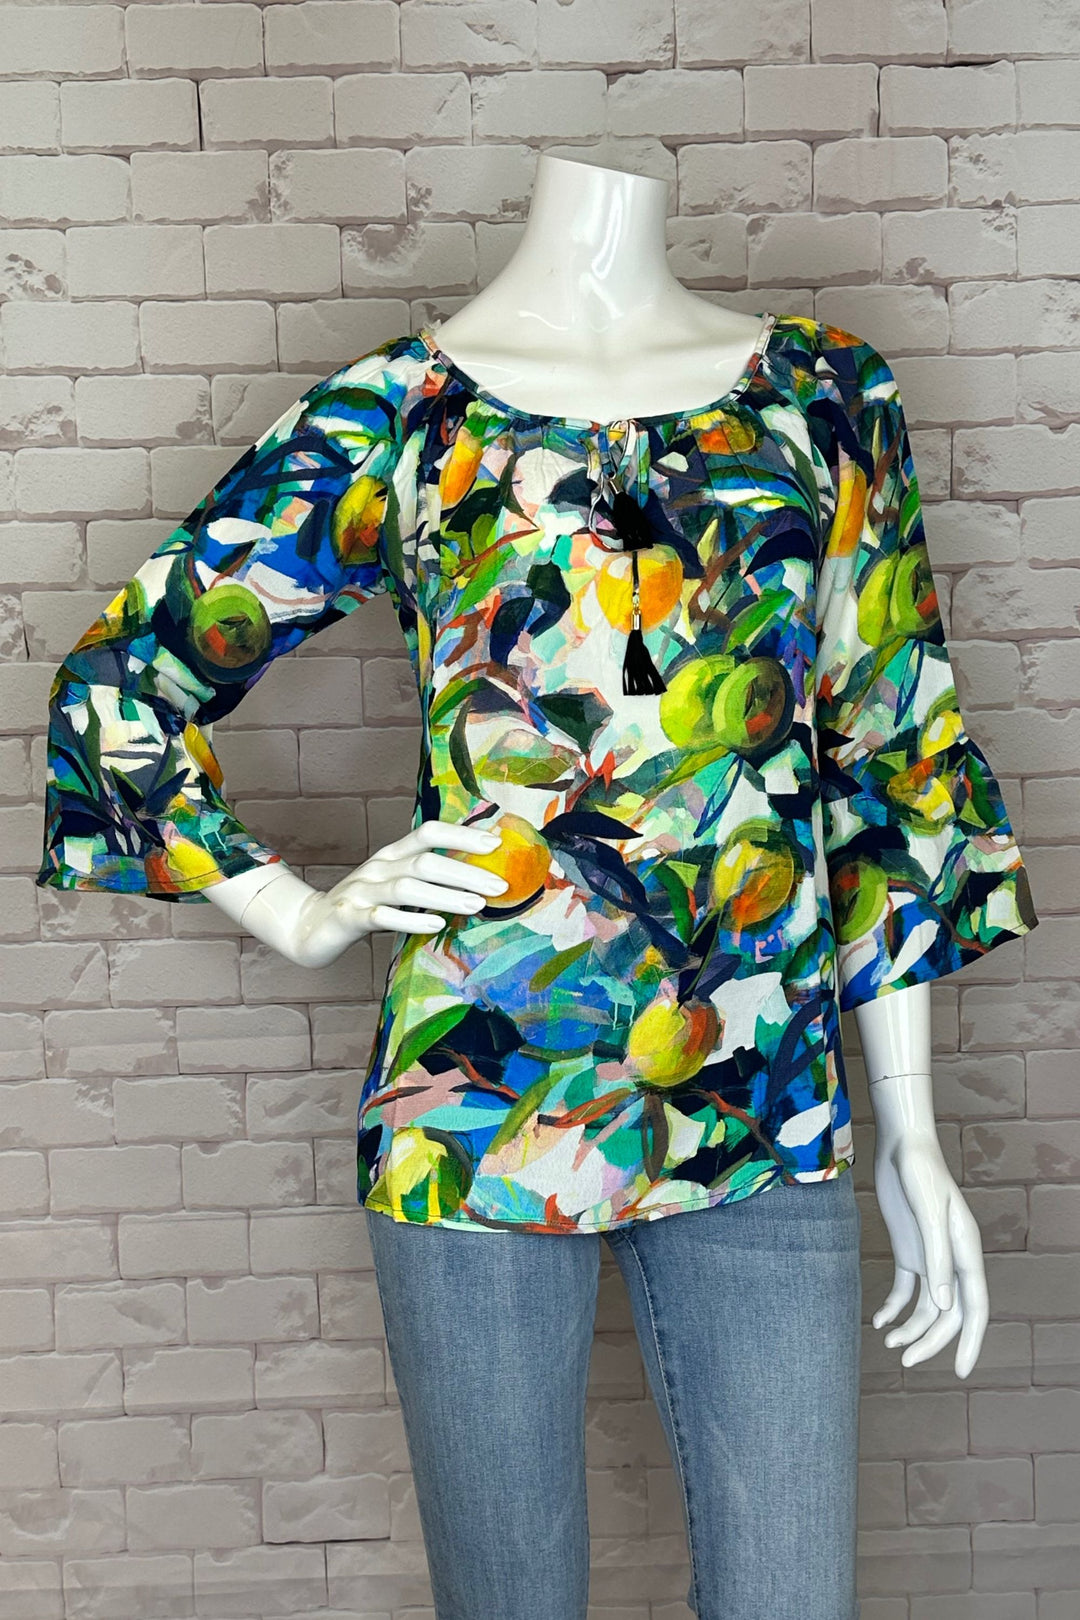 Step into spring wearing this Orangerie Ruffle Sleeve Top, lively lemon fruit abstract print, ruffle detail at the cuffs and dreamy light fabric.